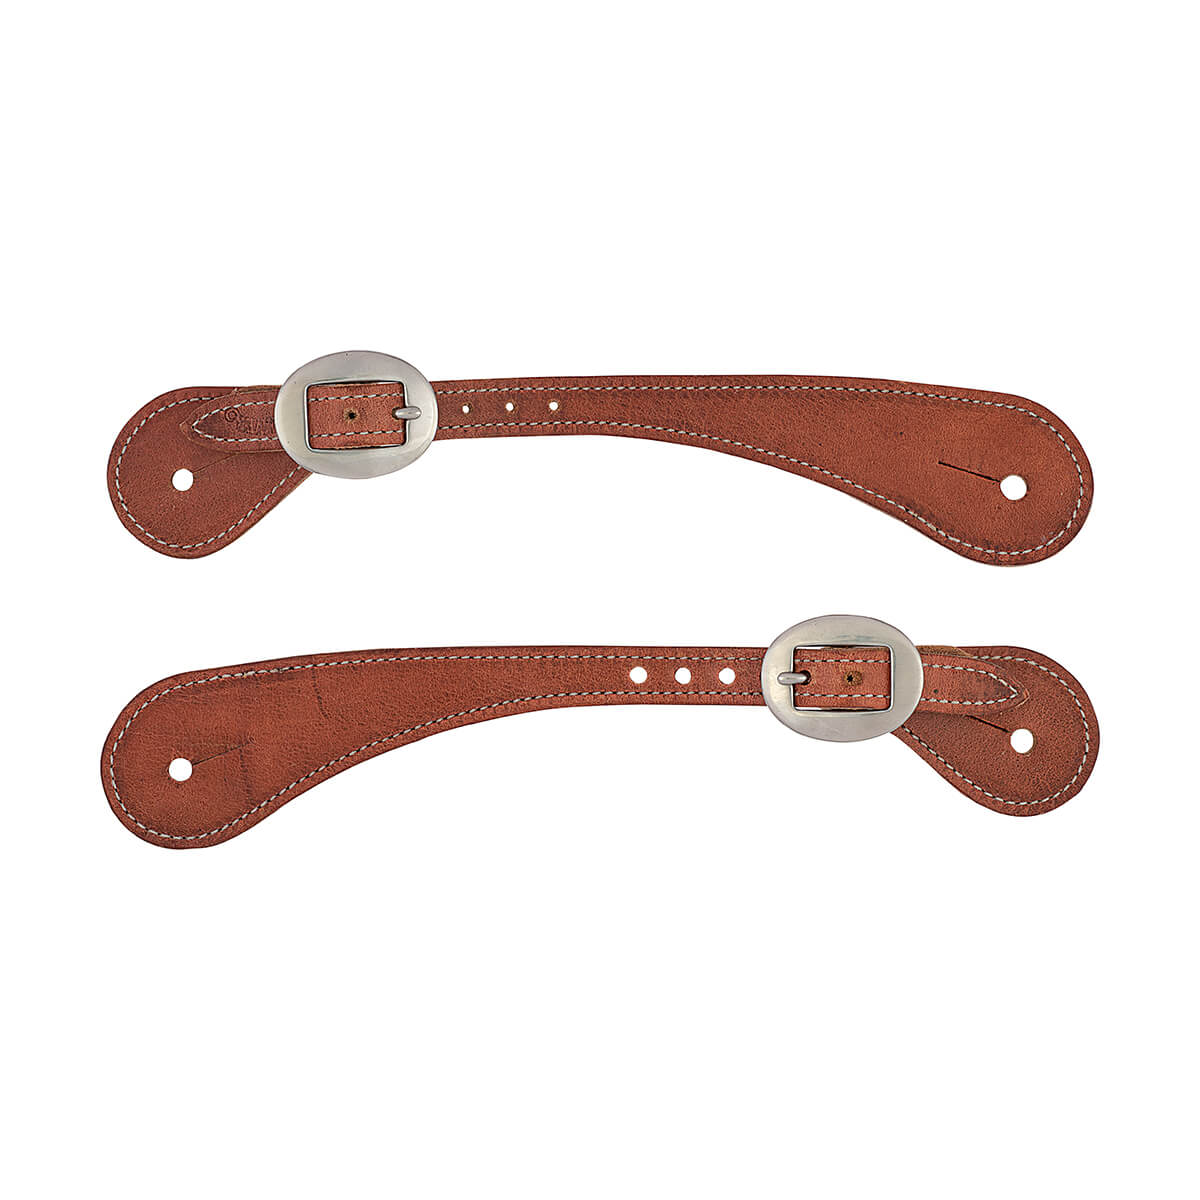 Mens Shaped Harness Leather Spur Straps, Russet